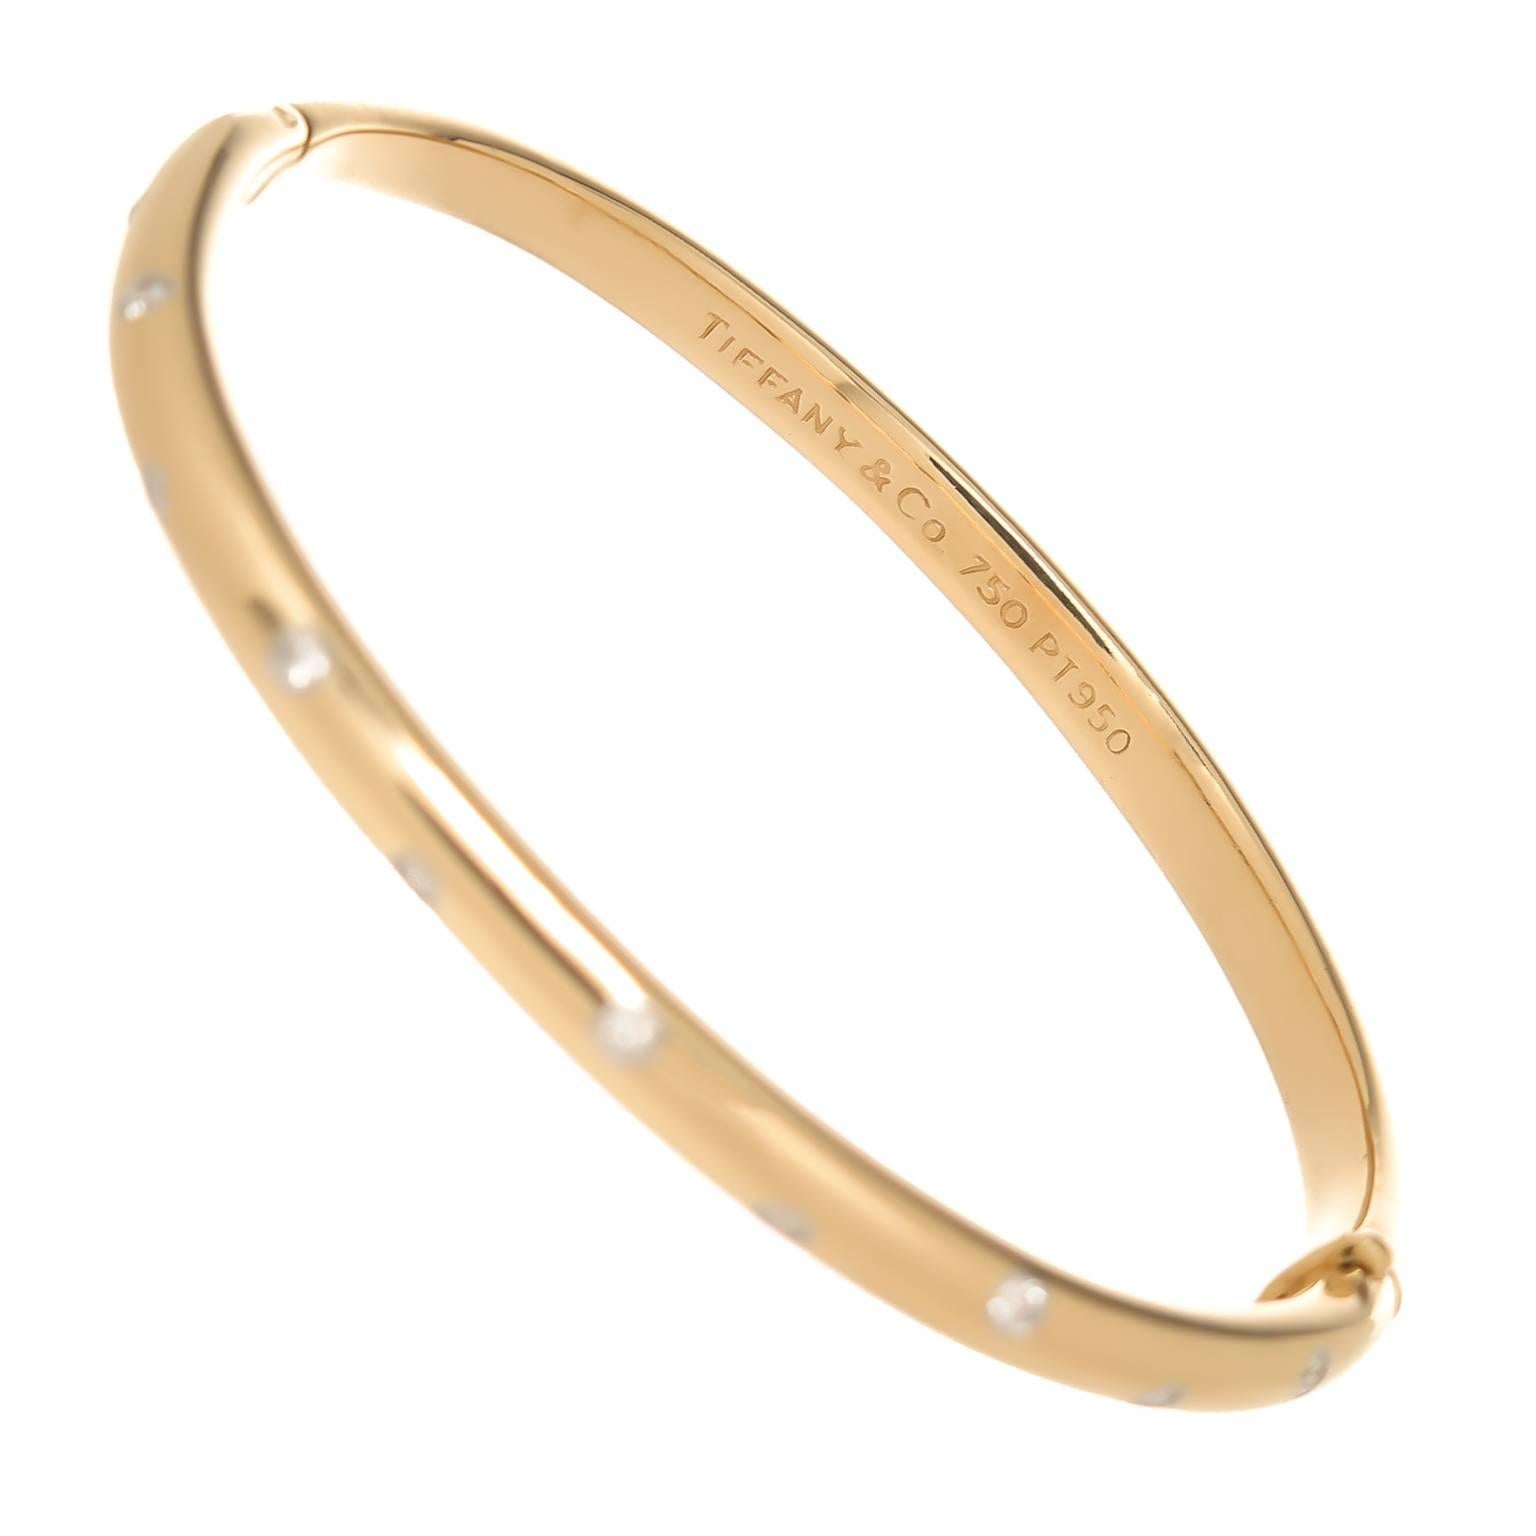 Circa 2000 Tiffany & Company Etoile Collection 18K Yellow Gold and Platinum Bangle Bracelet. Set with 10 Round Brilliant cut Diamonds totaling .40 Carat. Measuring 4 MM wide, wrist measurement 6 1/2 inch.